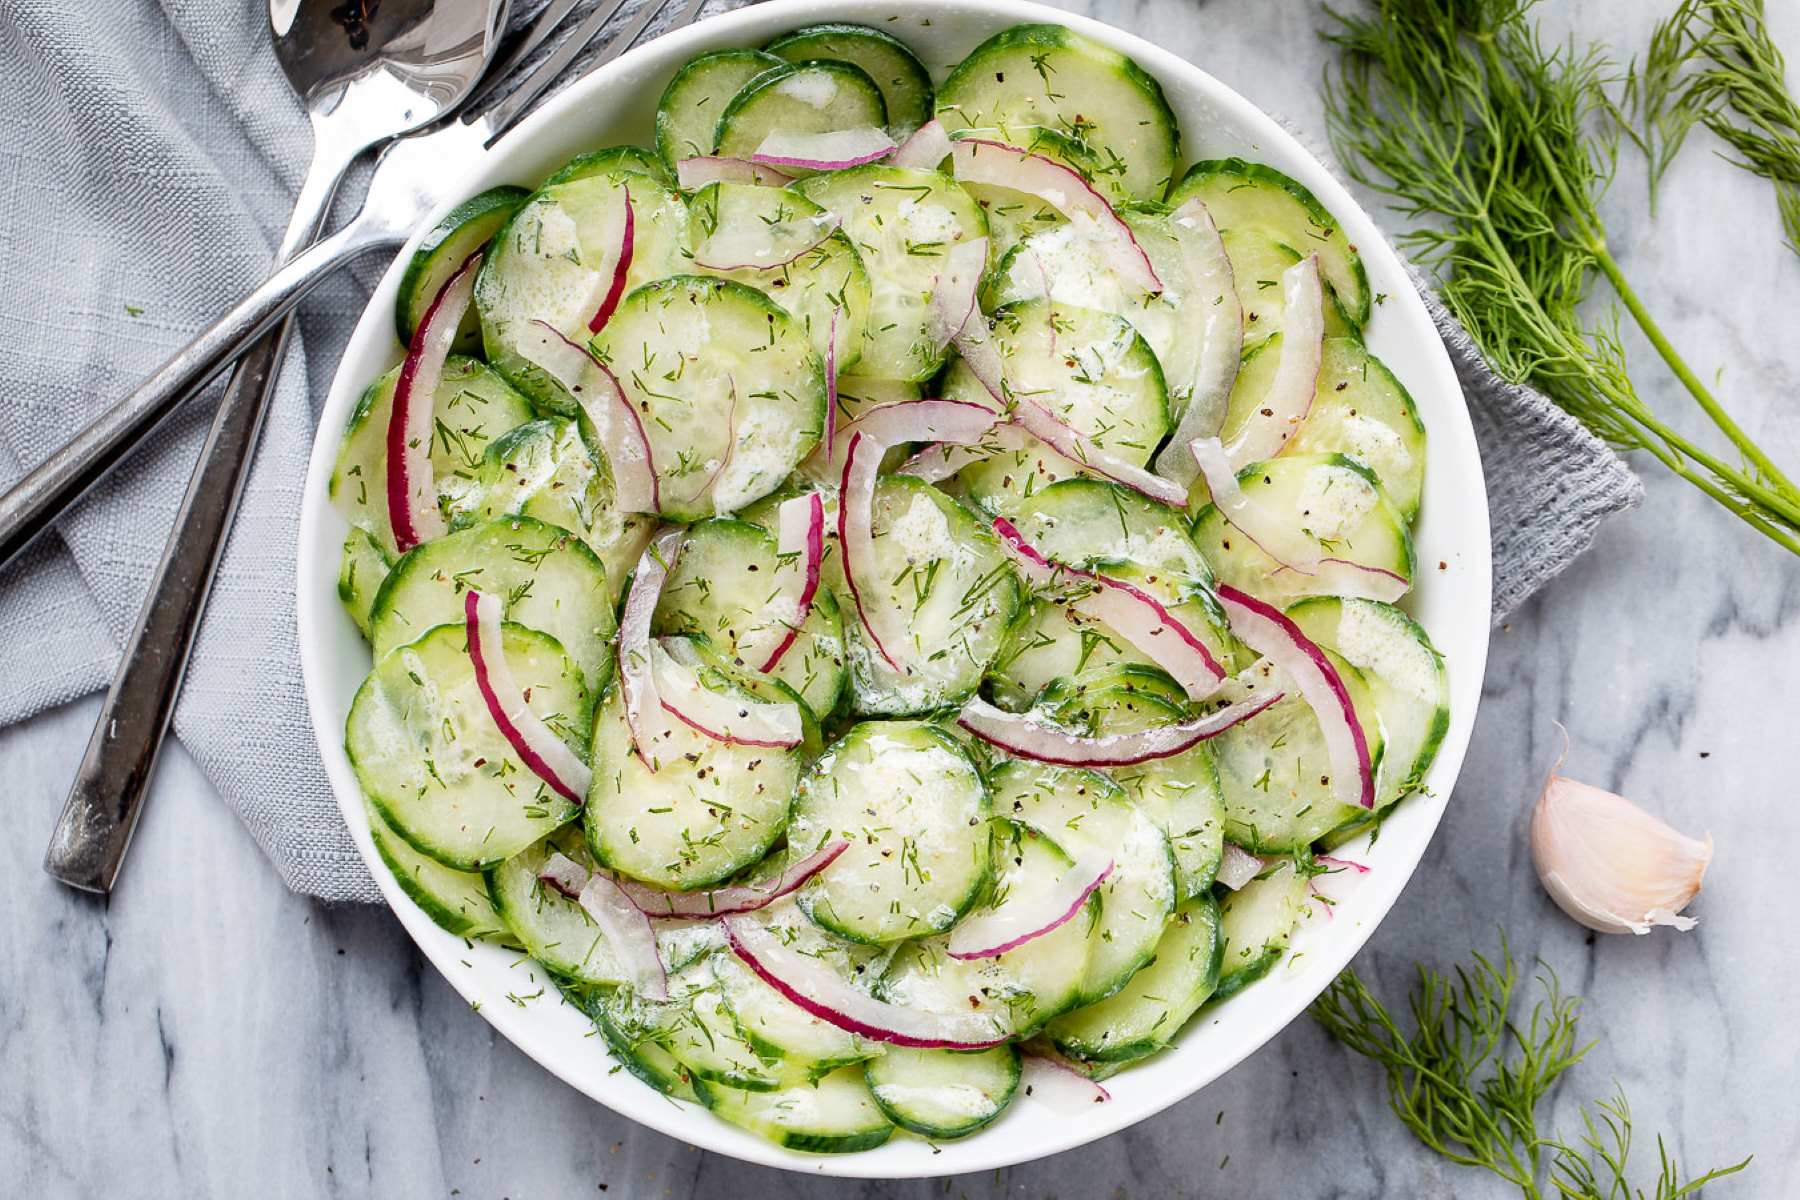 Delicious Cucumber Salad With Red Onion And Dill – Perfect For Foodies